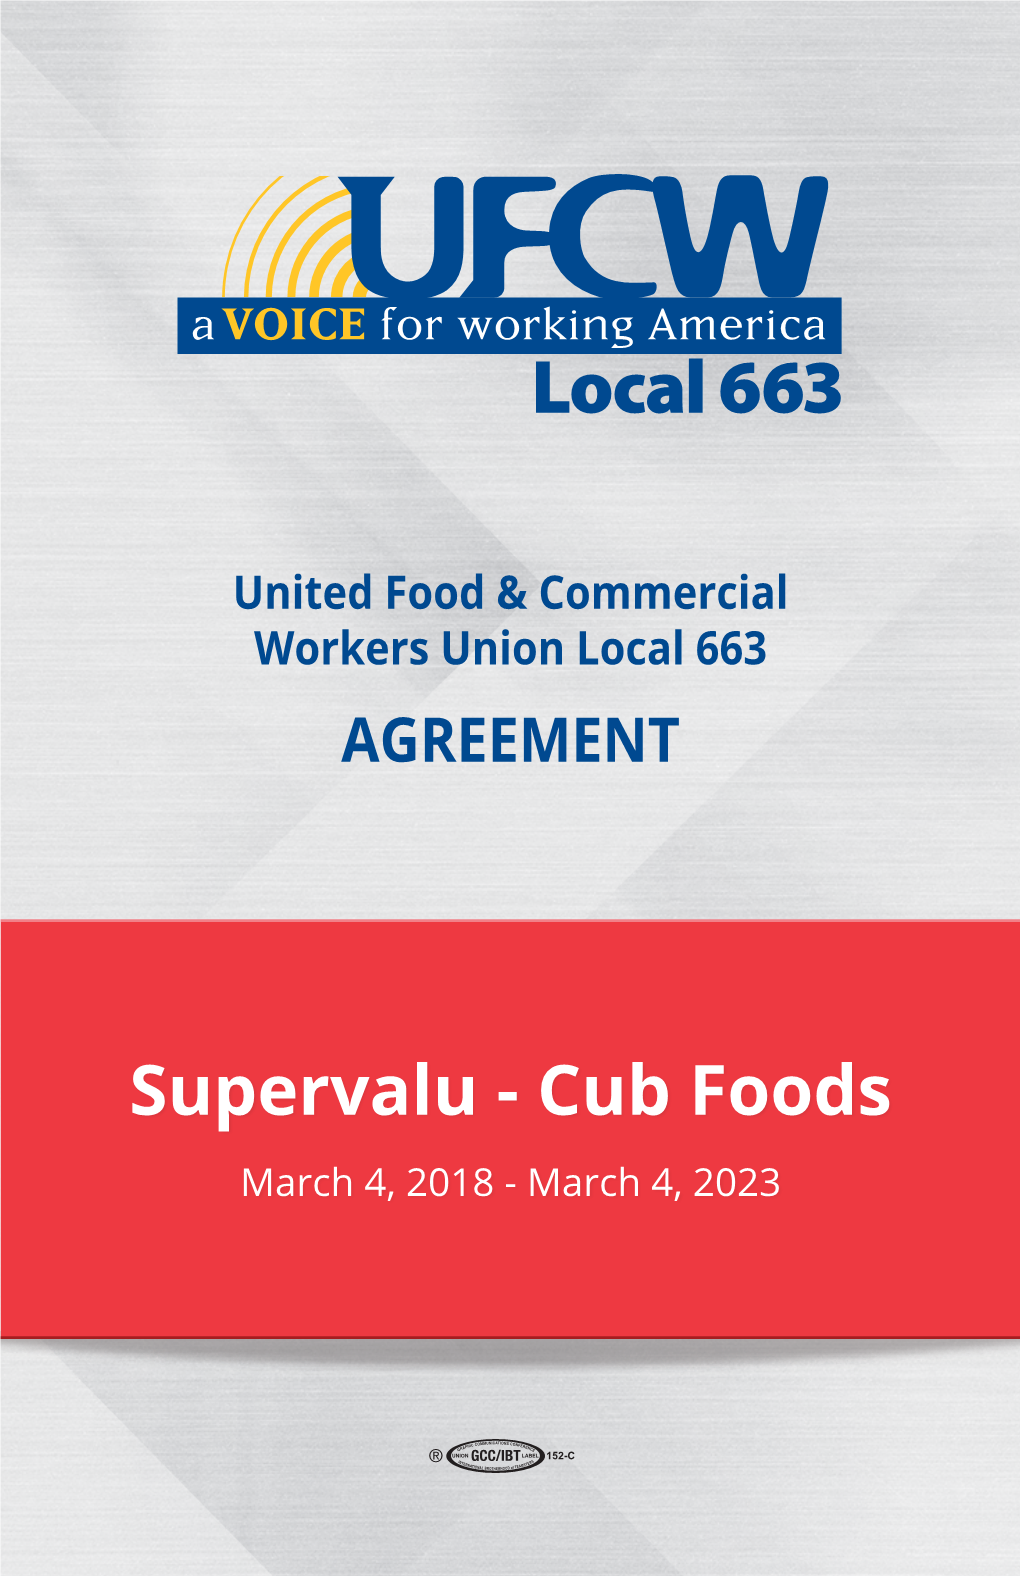 Supervalu - Cub Foods March 4, 2018 - March 4, 2023